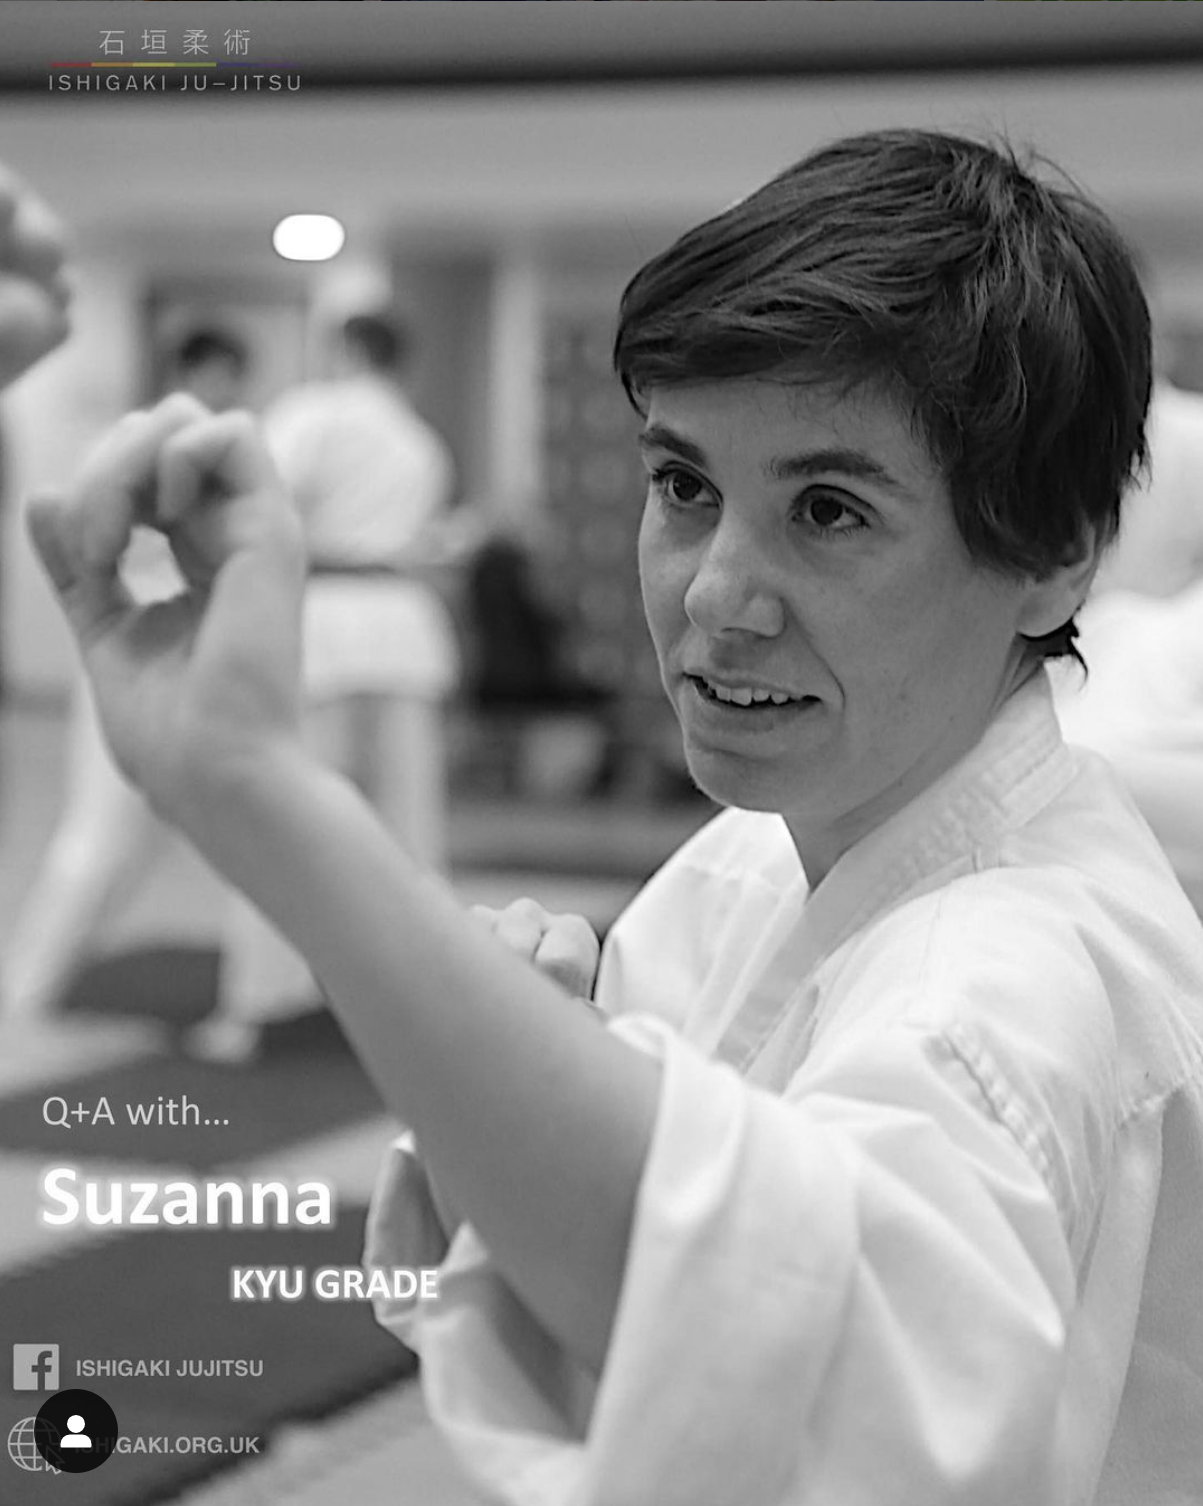 Q&A with Members: Suzanna